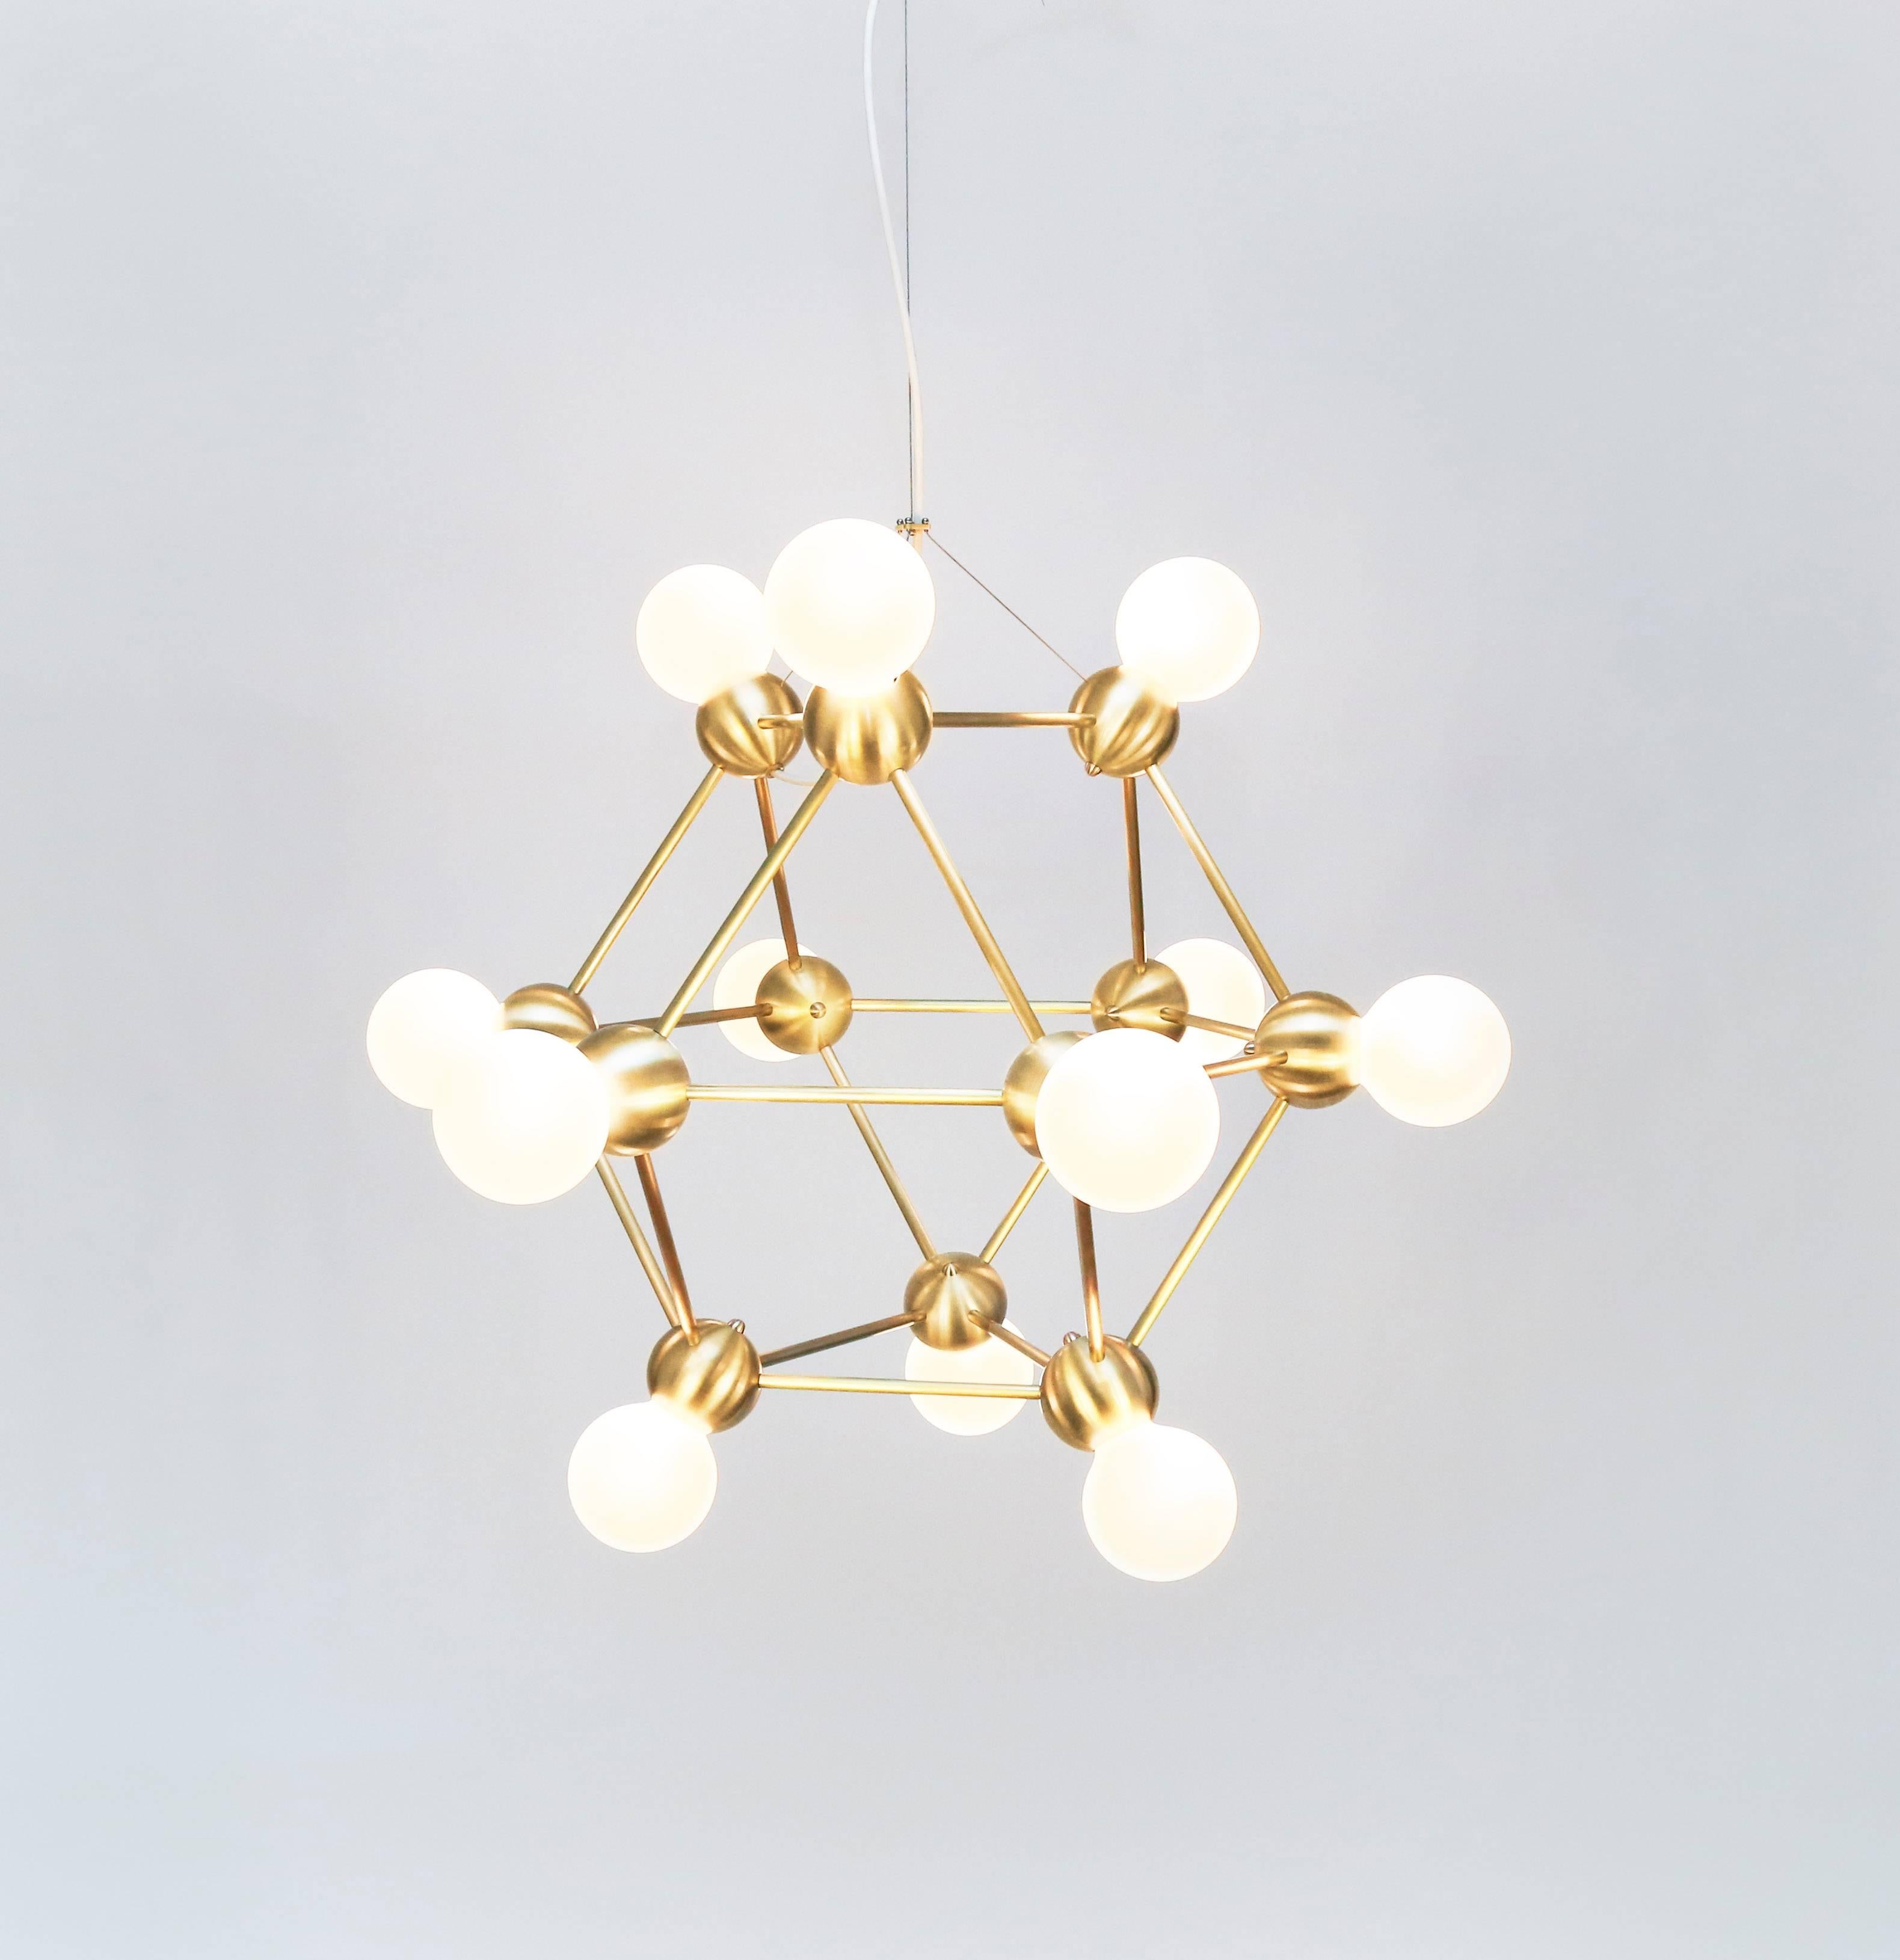 An airy, molecular brass chandelier inspired by 1960s Italian lighting. Part of the 